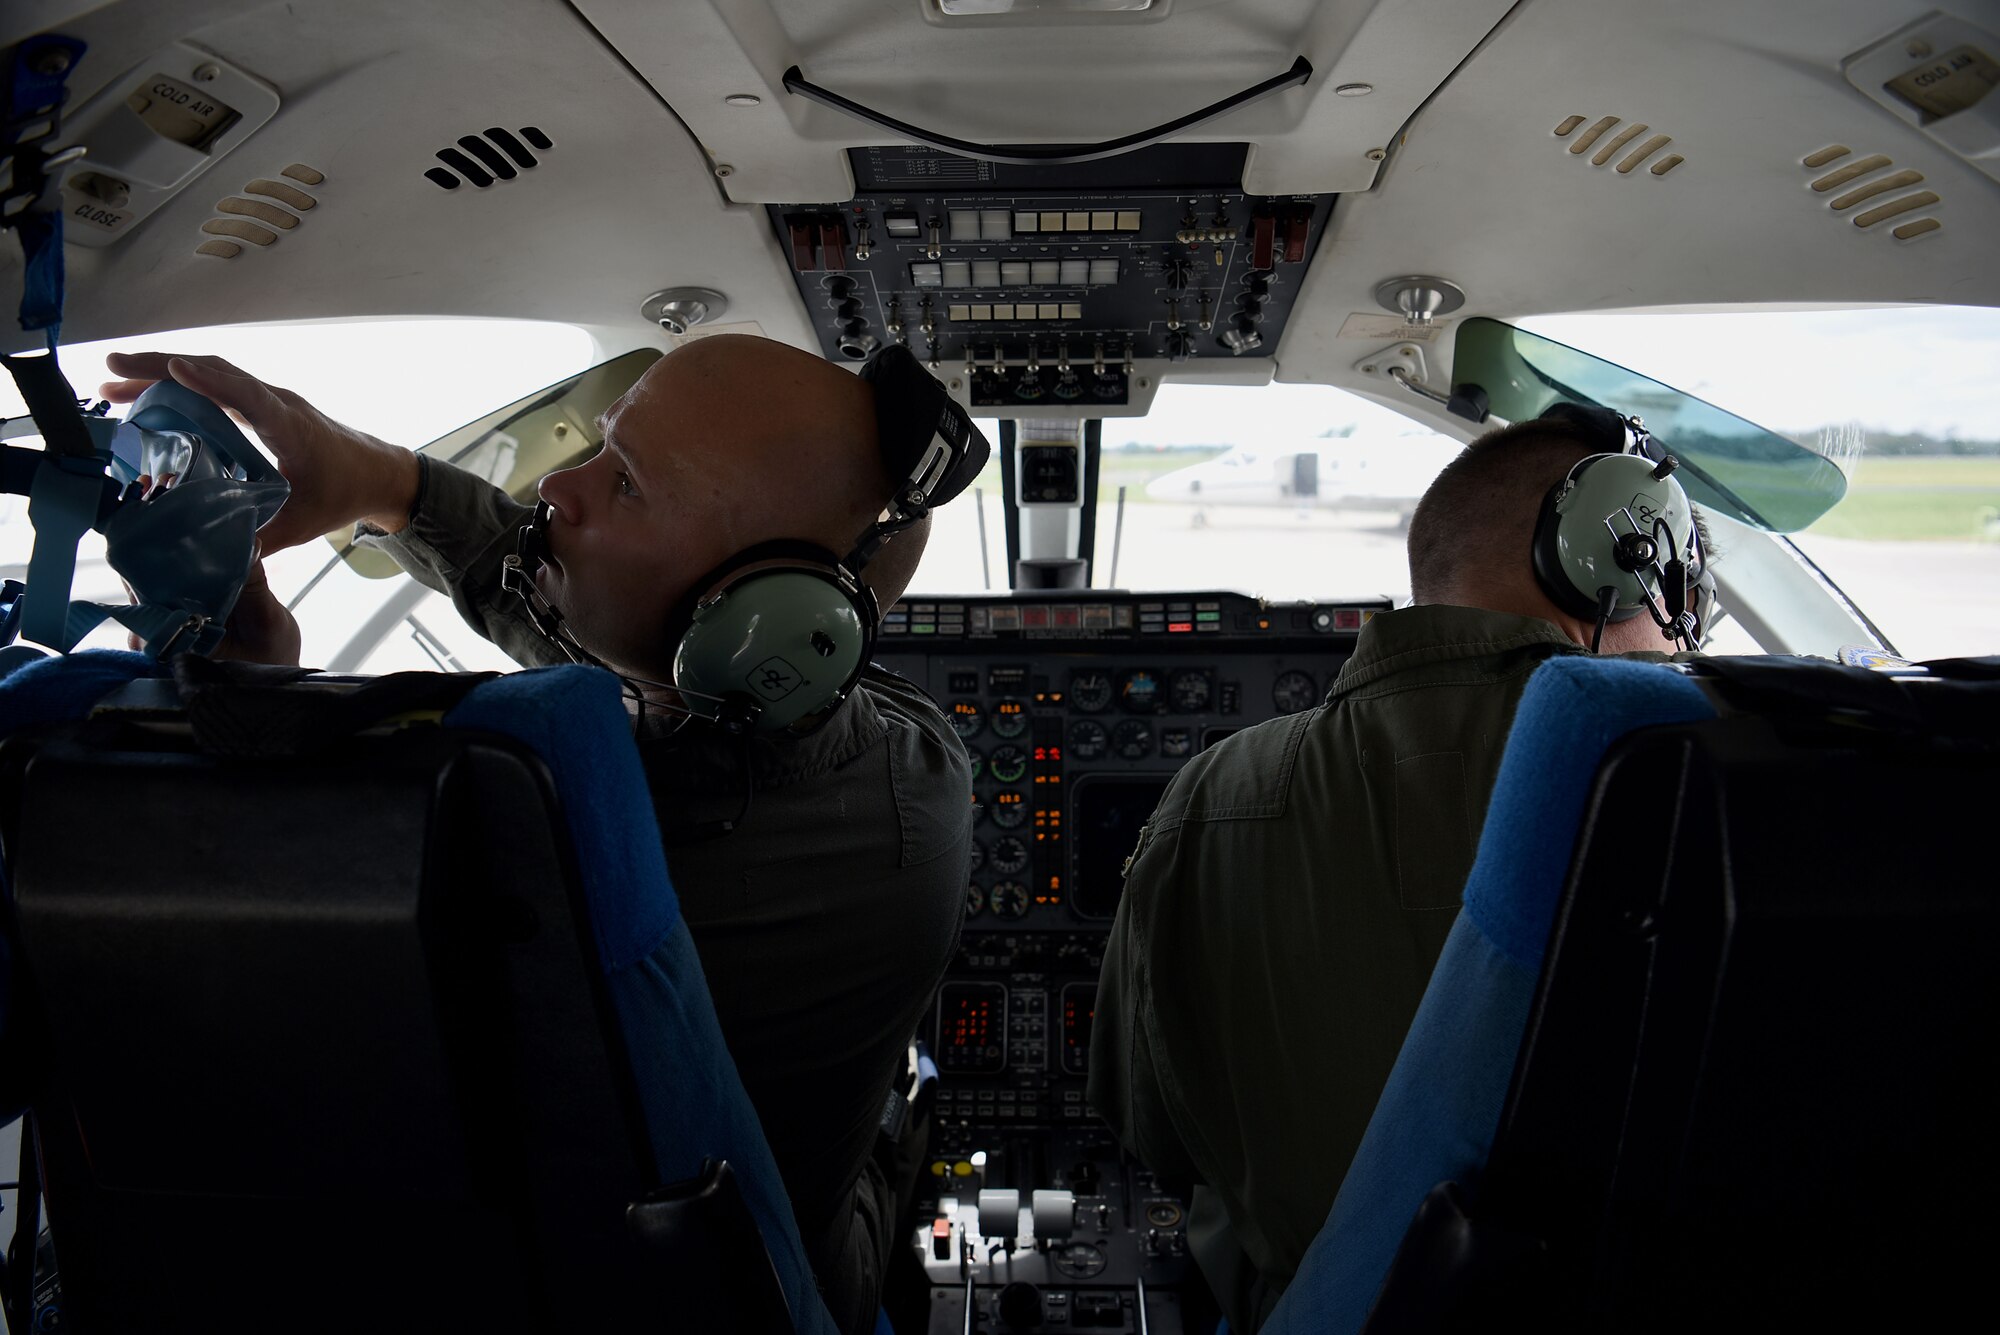 Second Lt. Tyler Laska, 48th Flying Training Squadron student pilot, and Lt. Col. Gregory Gibson, 48th FTS instructor pilot, prepare to fly a training sortie July 23, 2018, from the Golden Triangle Regional Airport in Columbus, Mississippi. (U.S. Air Force photo by Airman 1st Class Keith Holcomb)